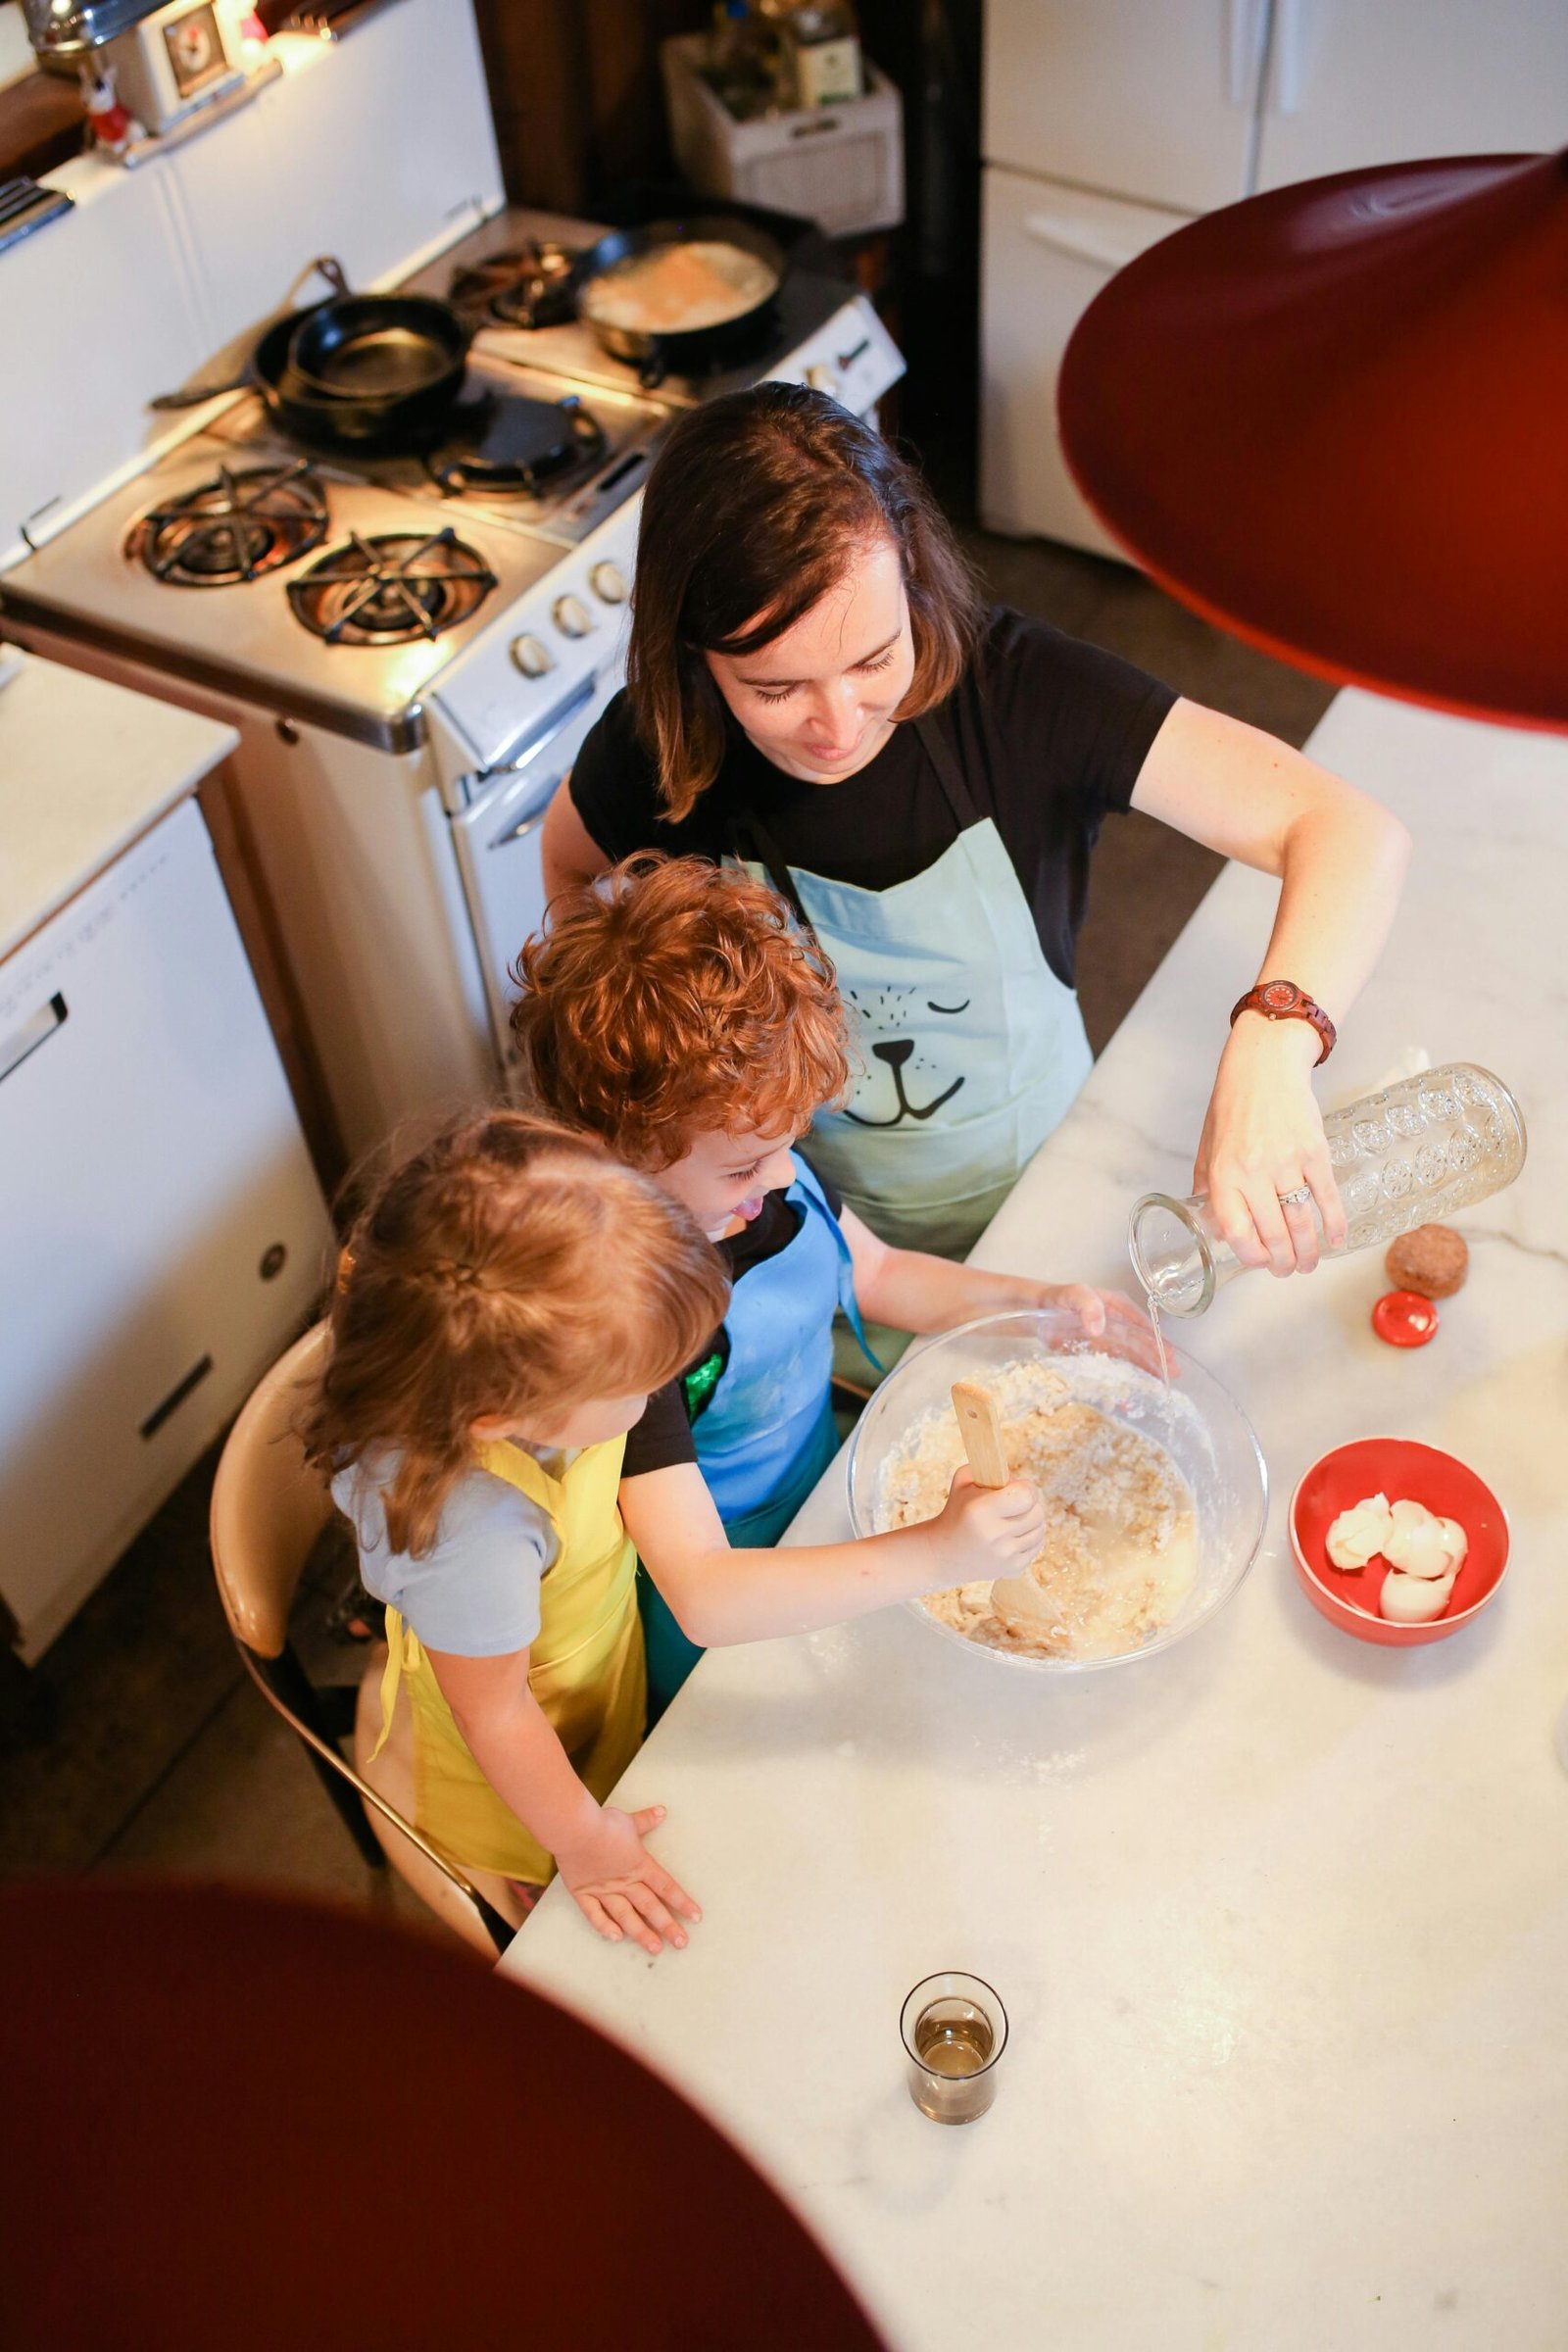 Nourishing Nibbles: 10 Nutrient-Rich Foods to Cook for Growing Kids